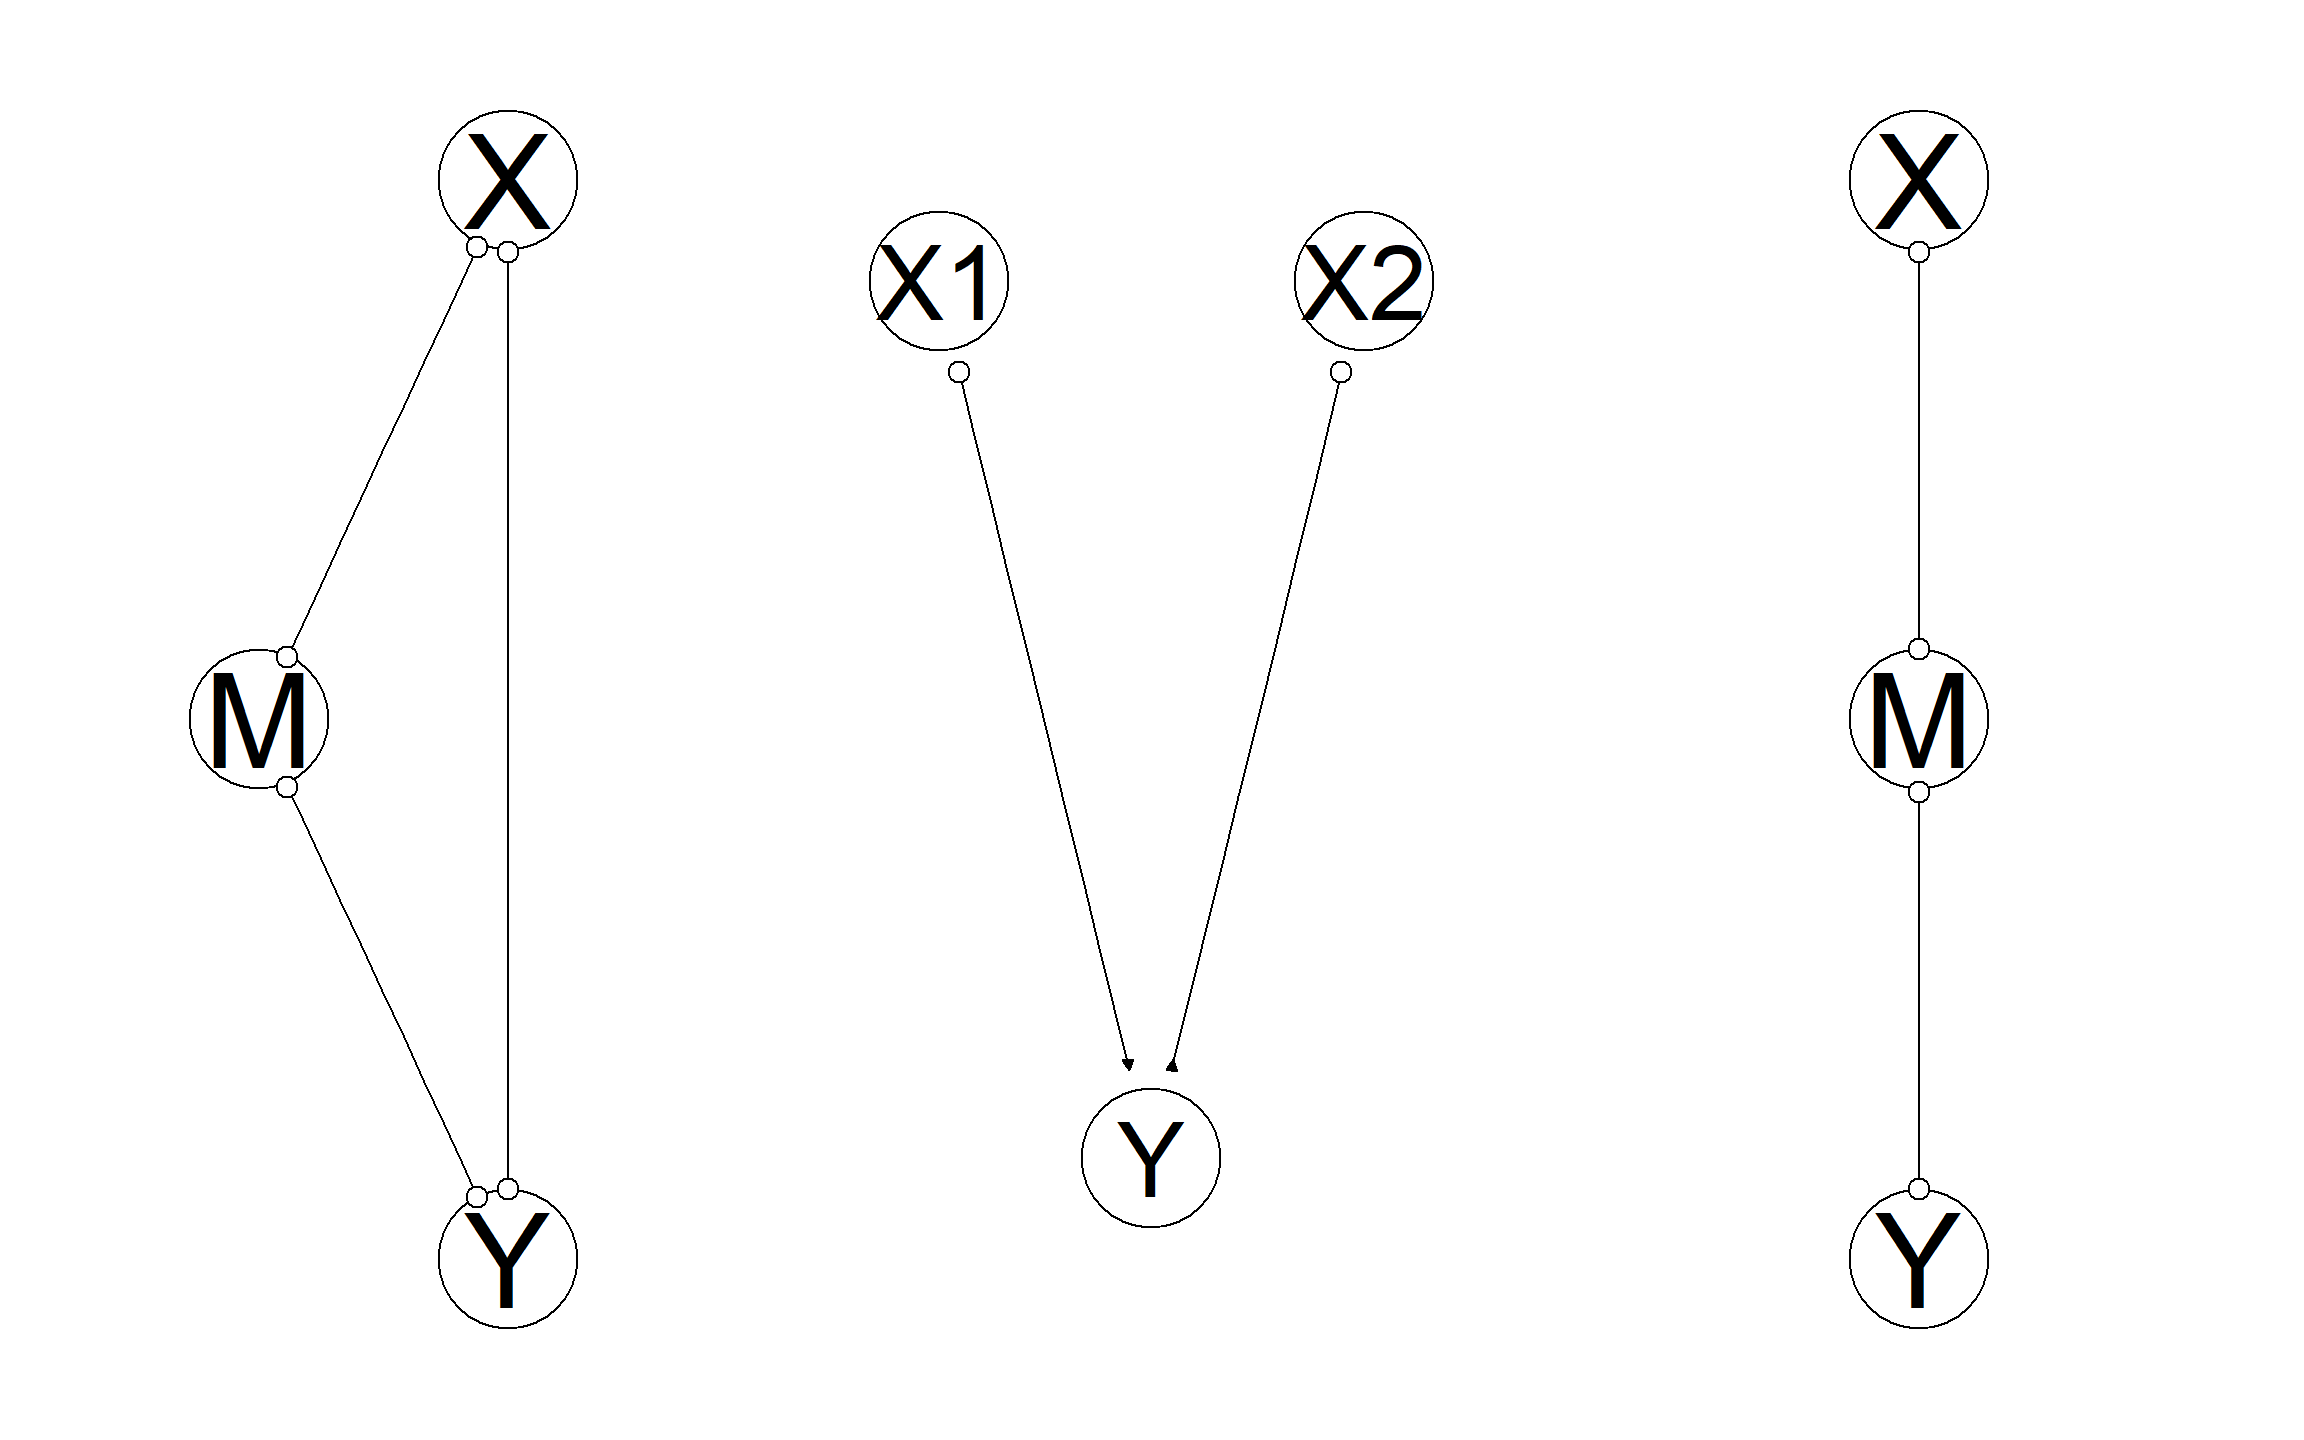 (Partially) recovered DAGs from data. Circles indicate uncertainty regarding whether an arrow starts or ends at a given point.